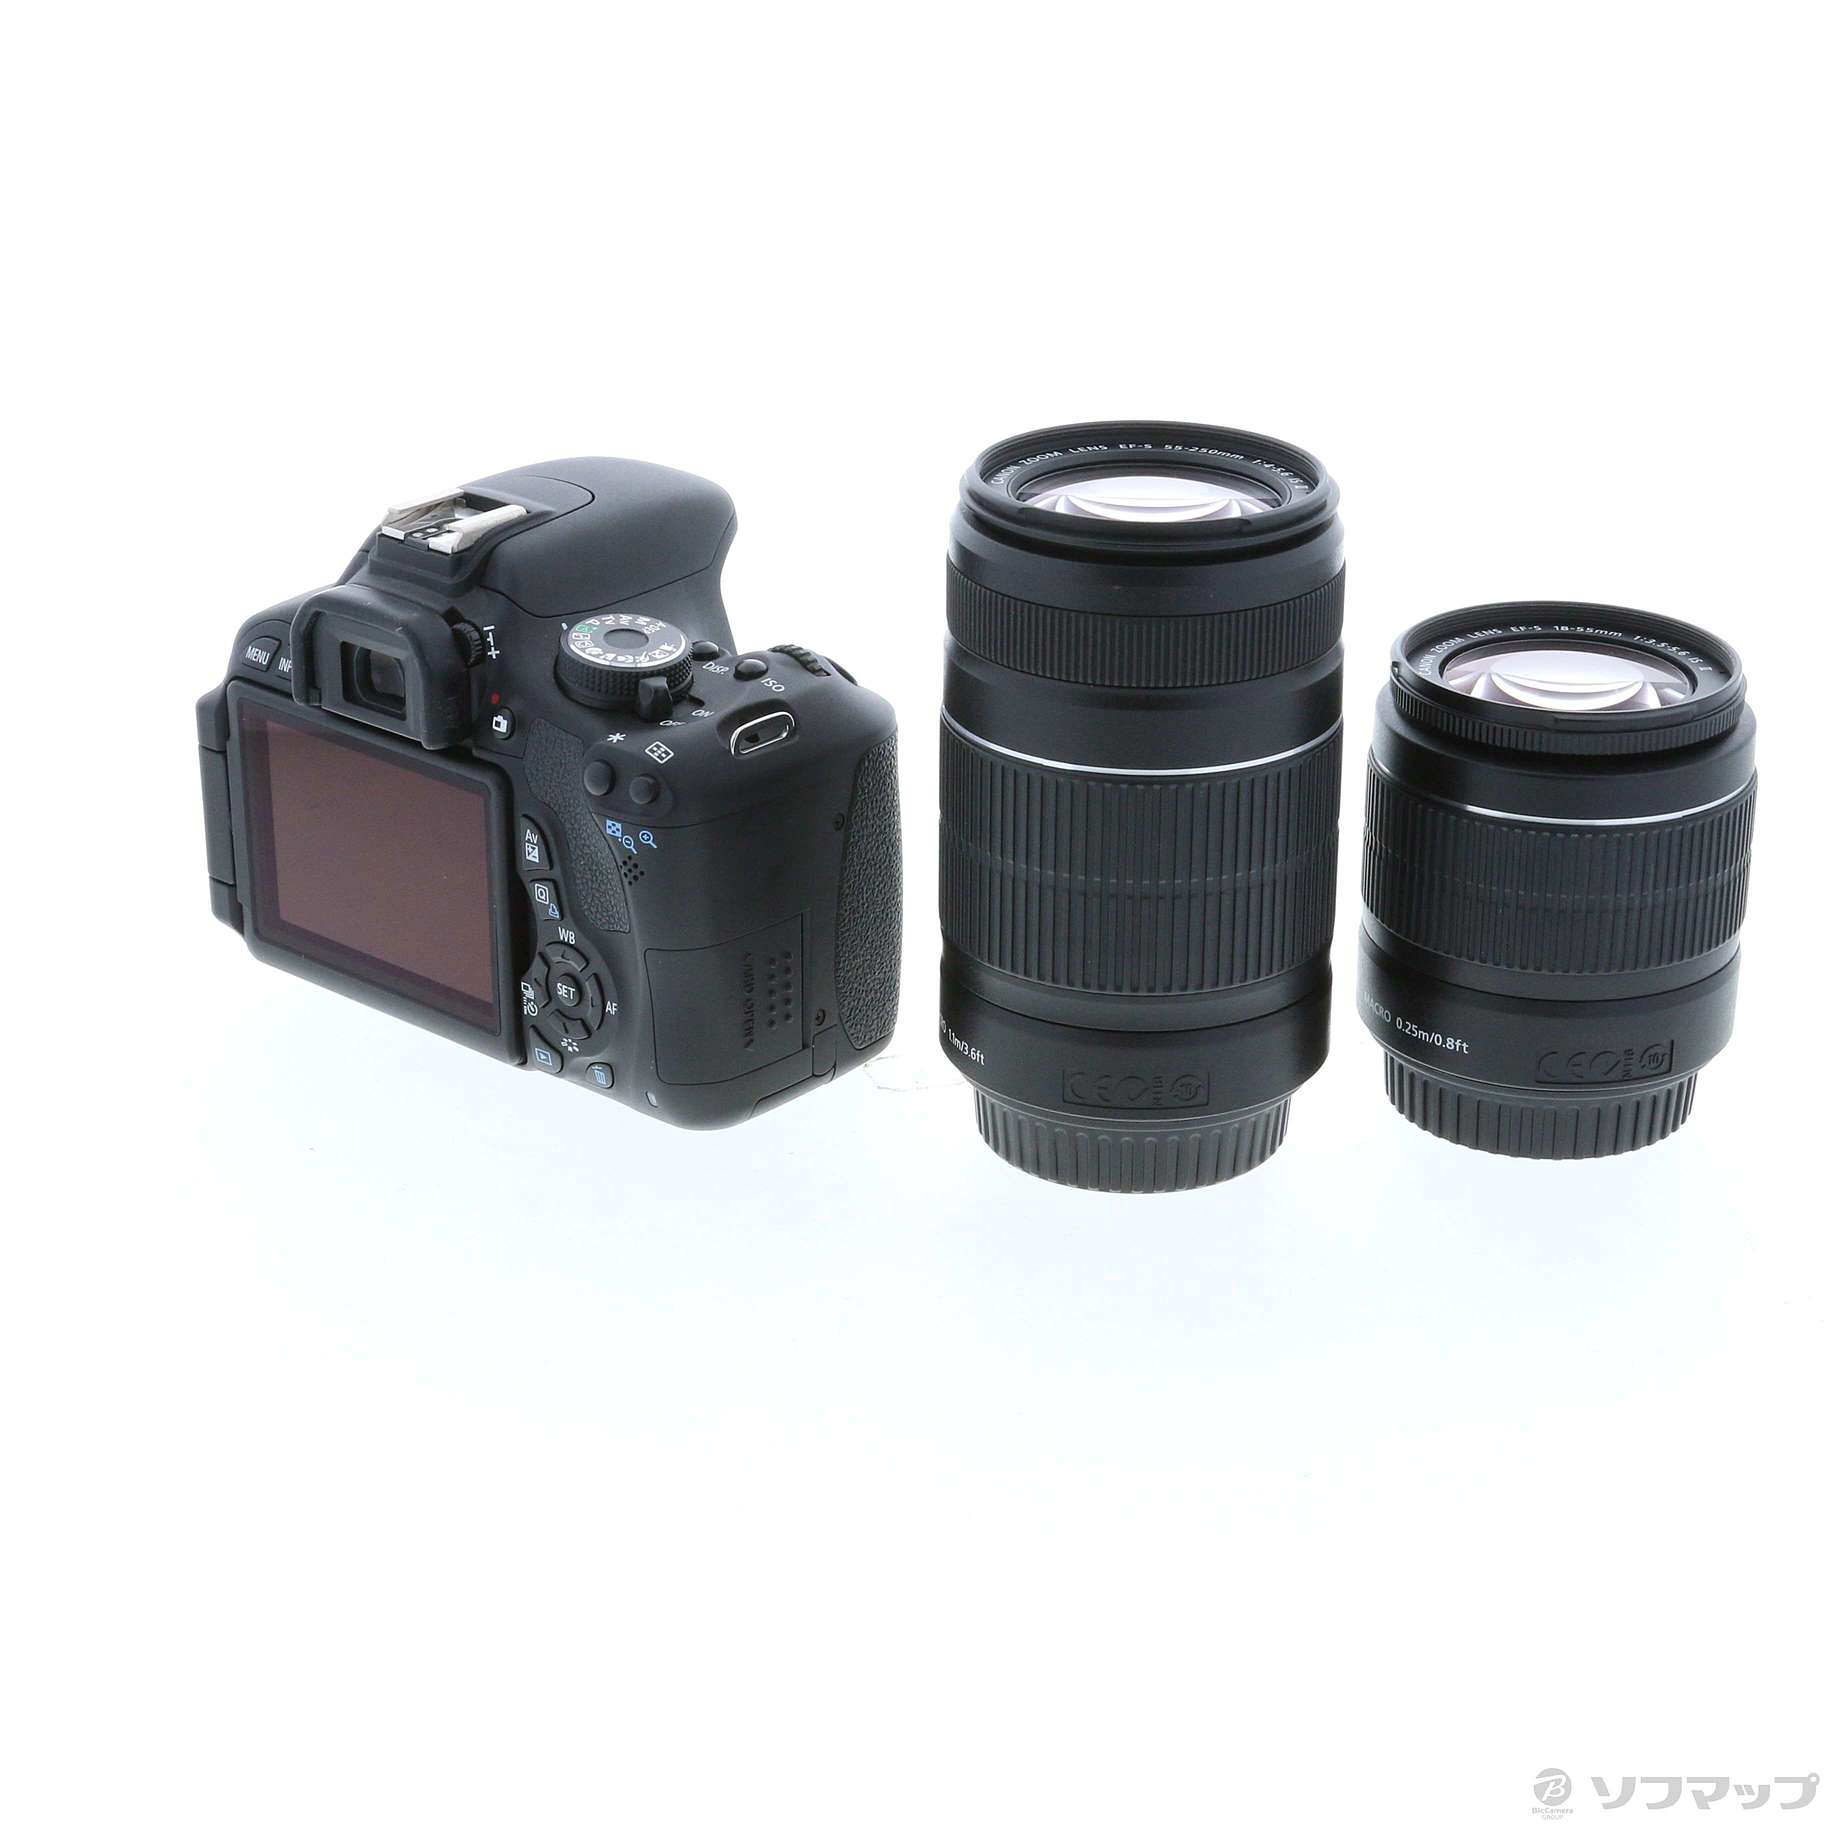 Canon EOS kiss X5 Wズームキット フルセット-